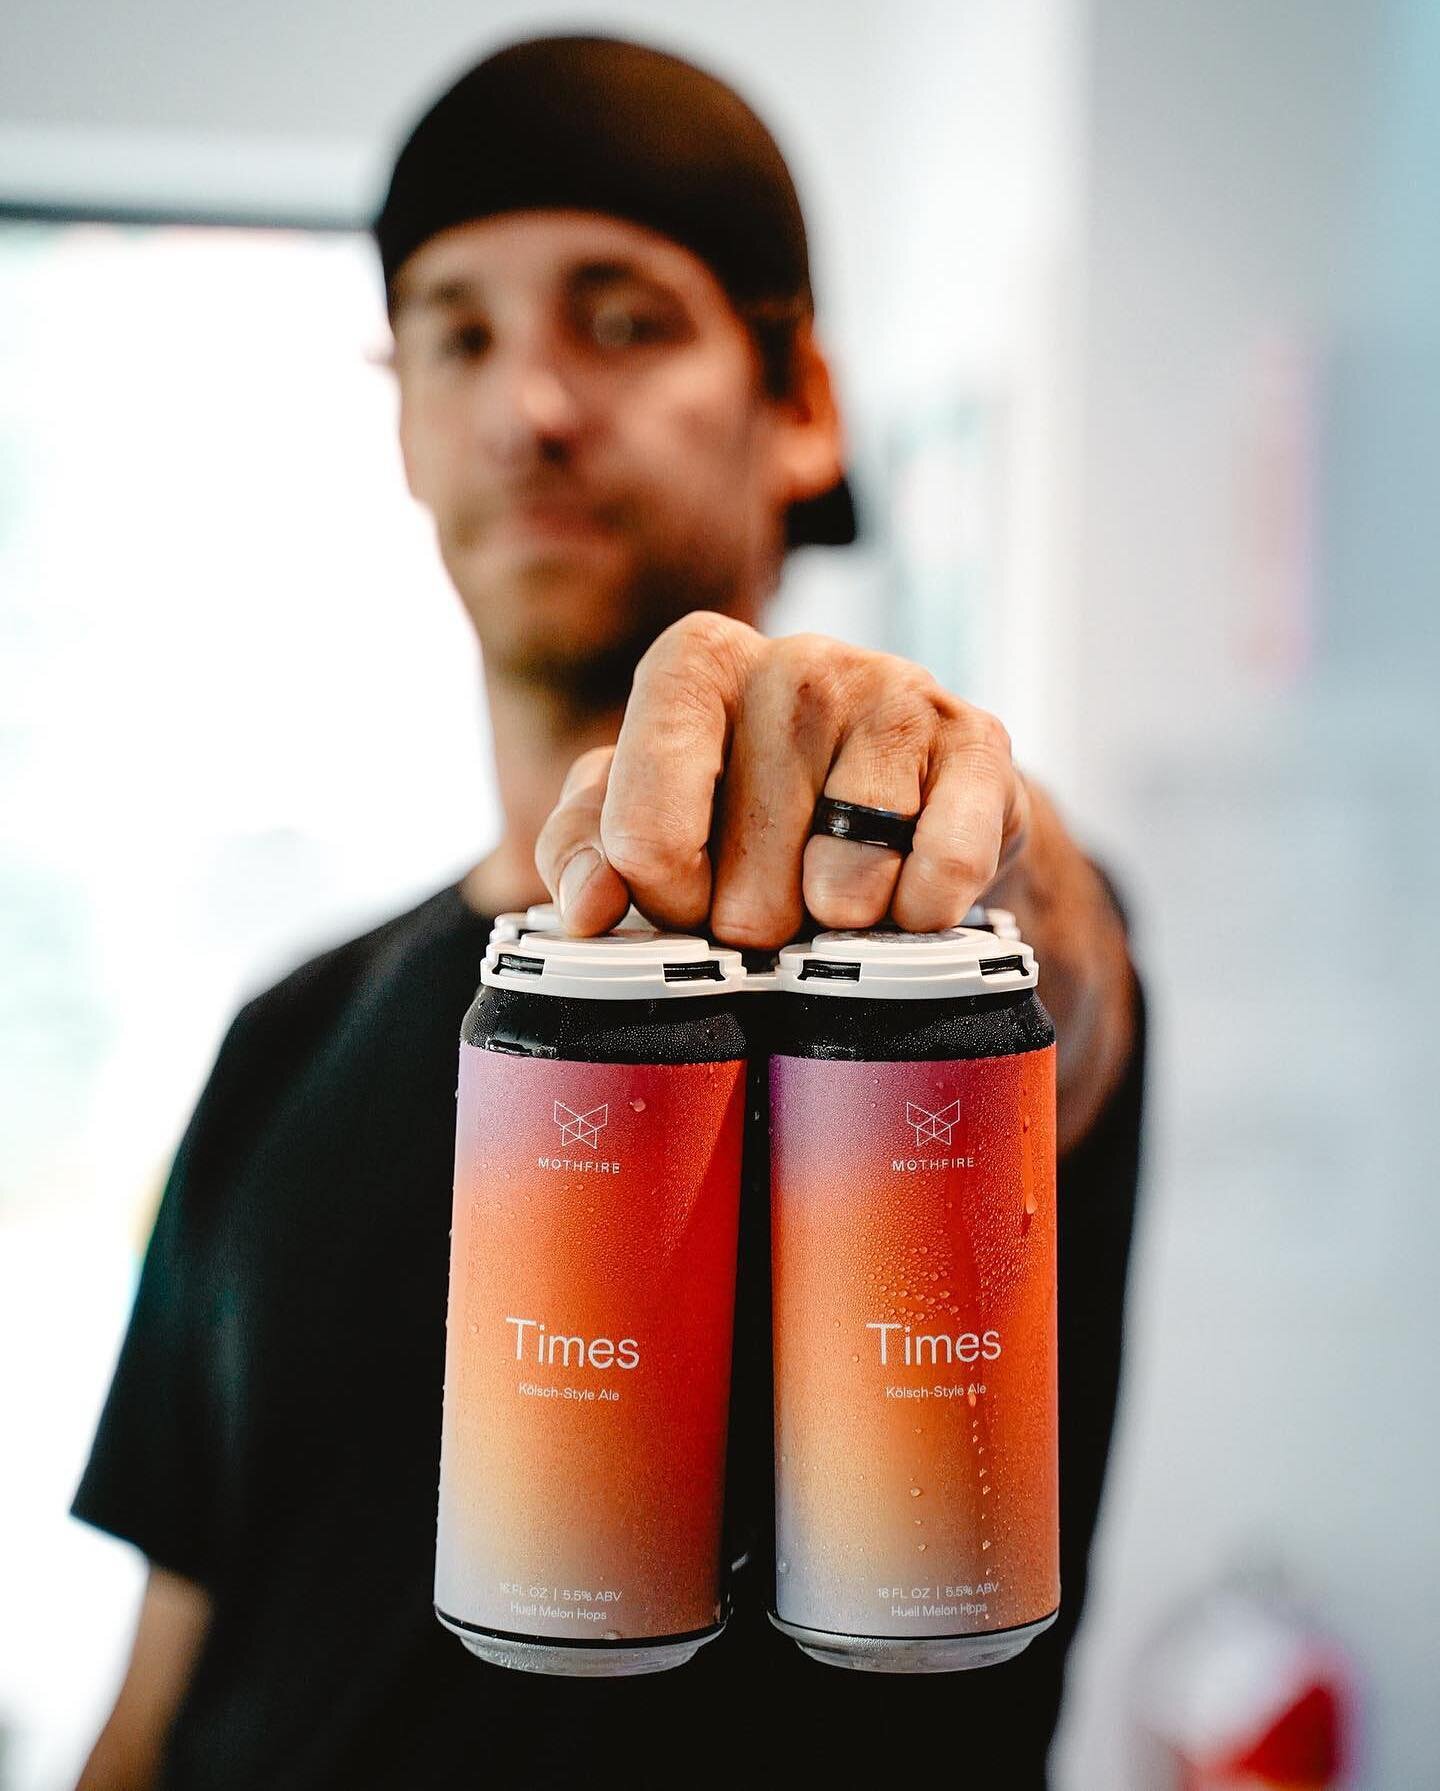 2️⃣ Mothfire FAVS return tonight, tapped and canned for 4pm:

Times: K&ouml;lsch-Style Ale, pours bold straw yellow - clean, refreshing, and effervescent. It gives a big and bright aroma thanks to a light dry hop of Huell Melon. 

Batch M: a hazy IPA